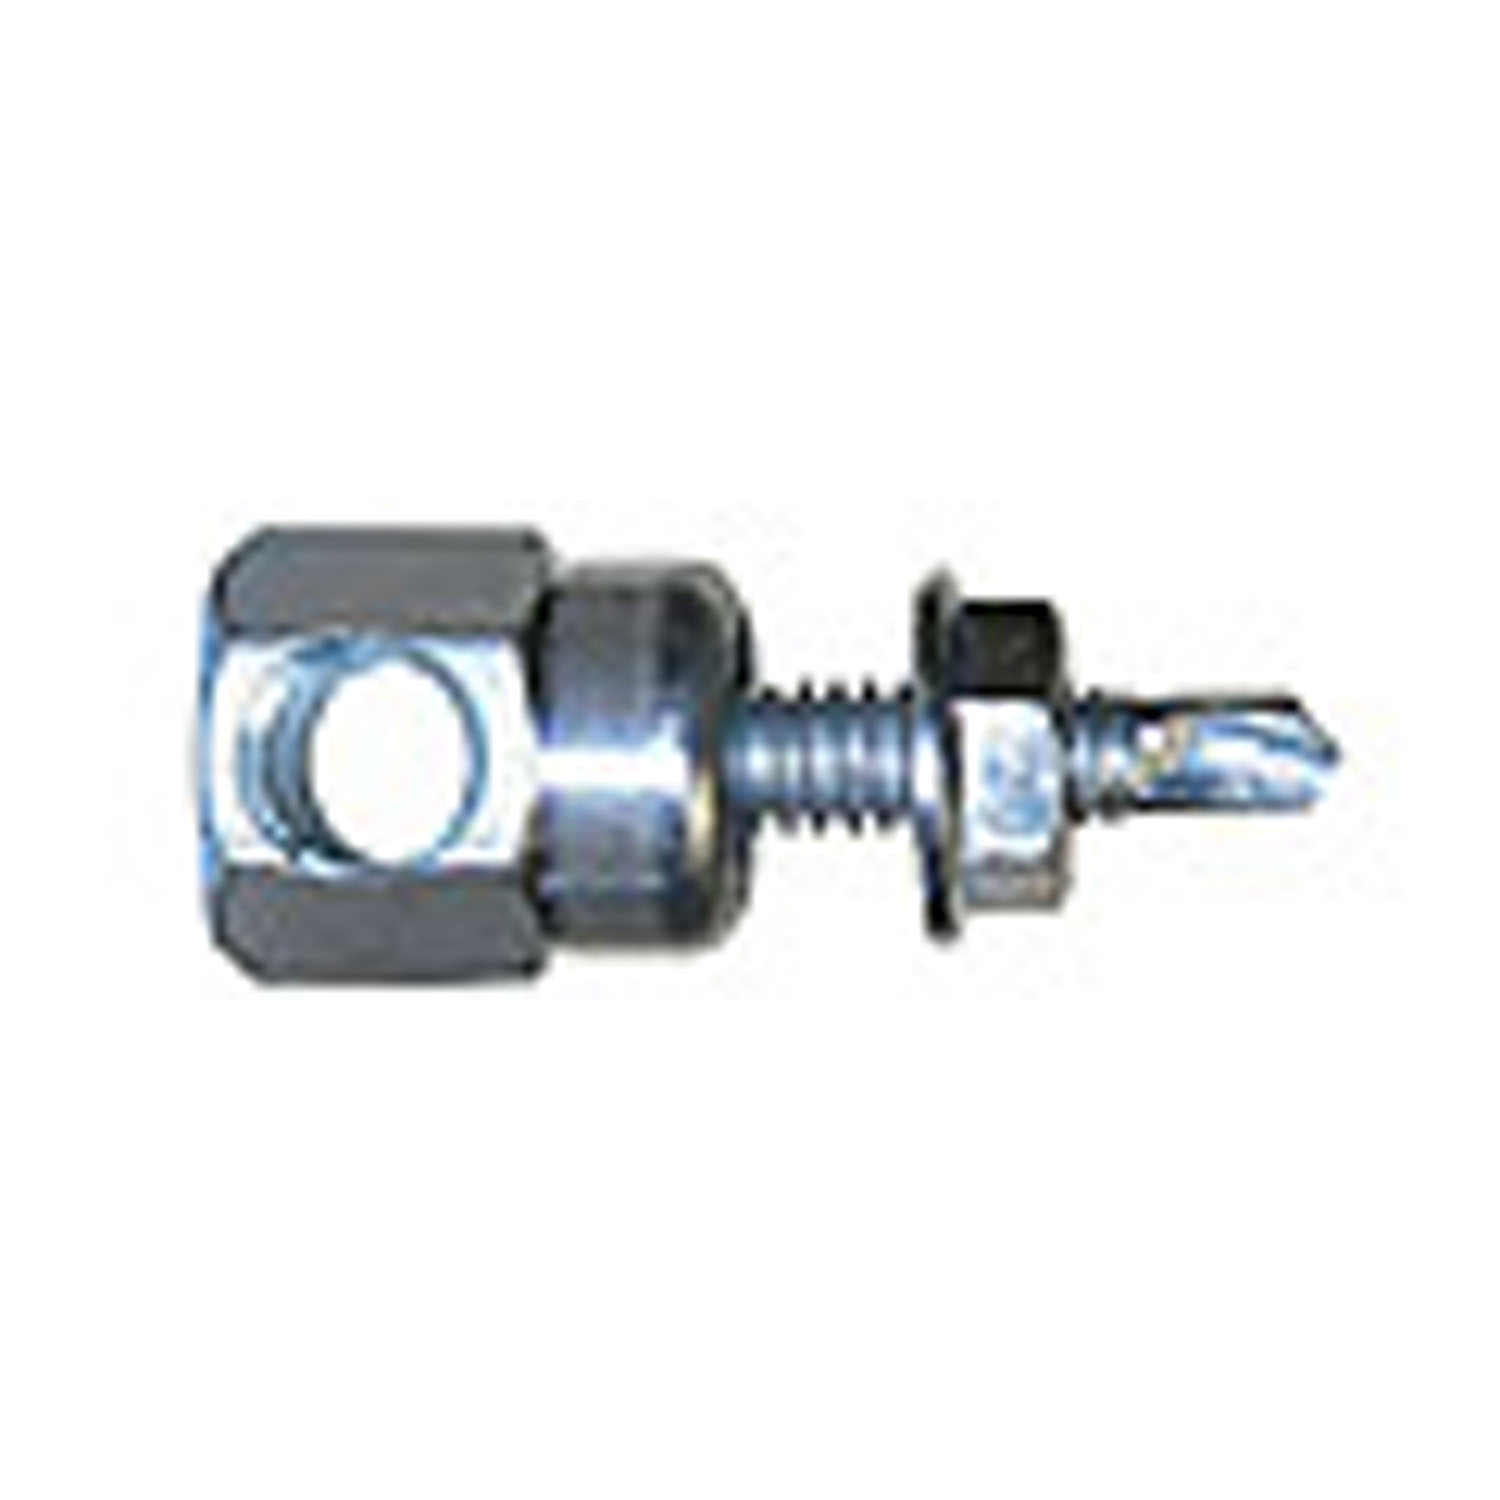 1/4 X 1 IN. SWDR 1 SAMMY 3/8 IN. HORIZONTAL THREADED ROD ANCHOR FOR STEEL